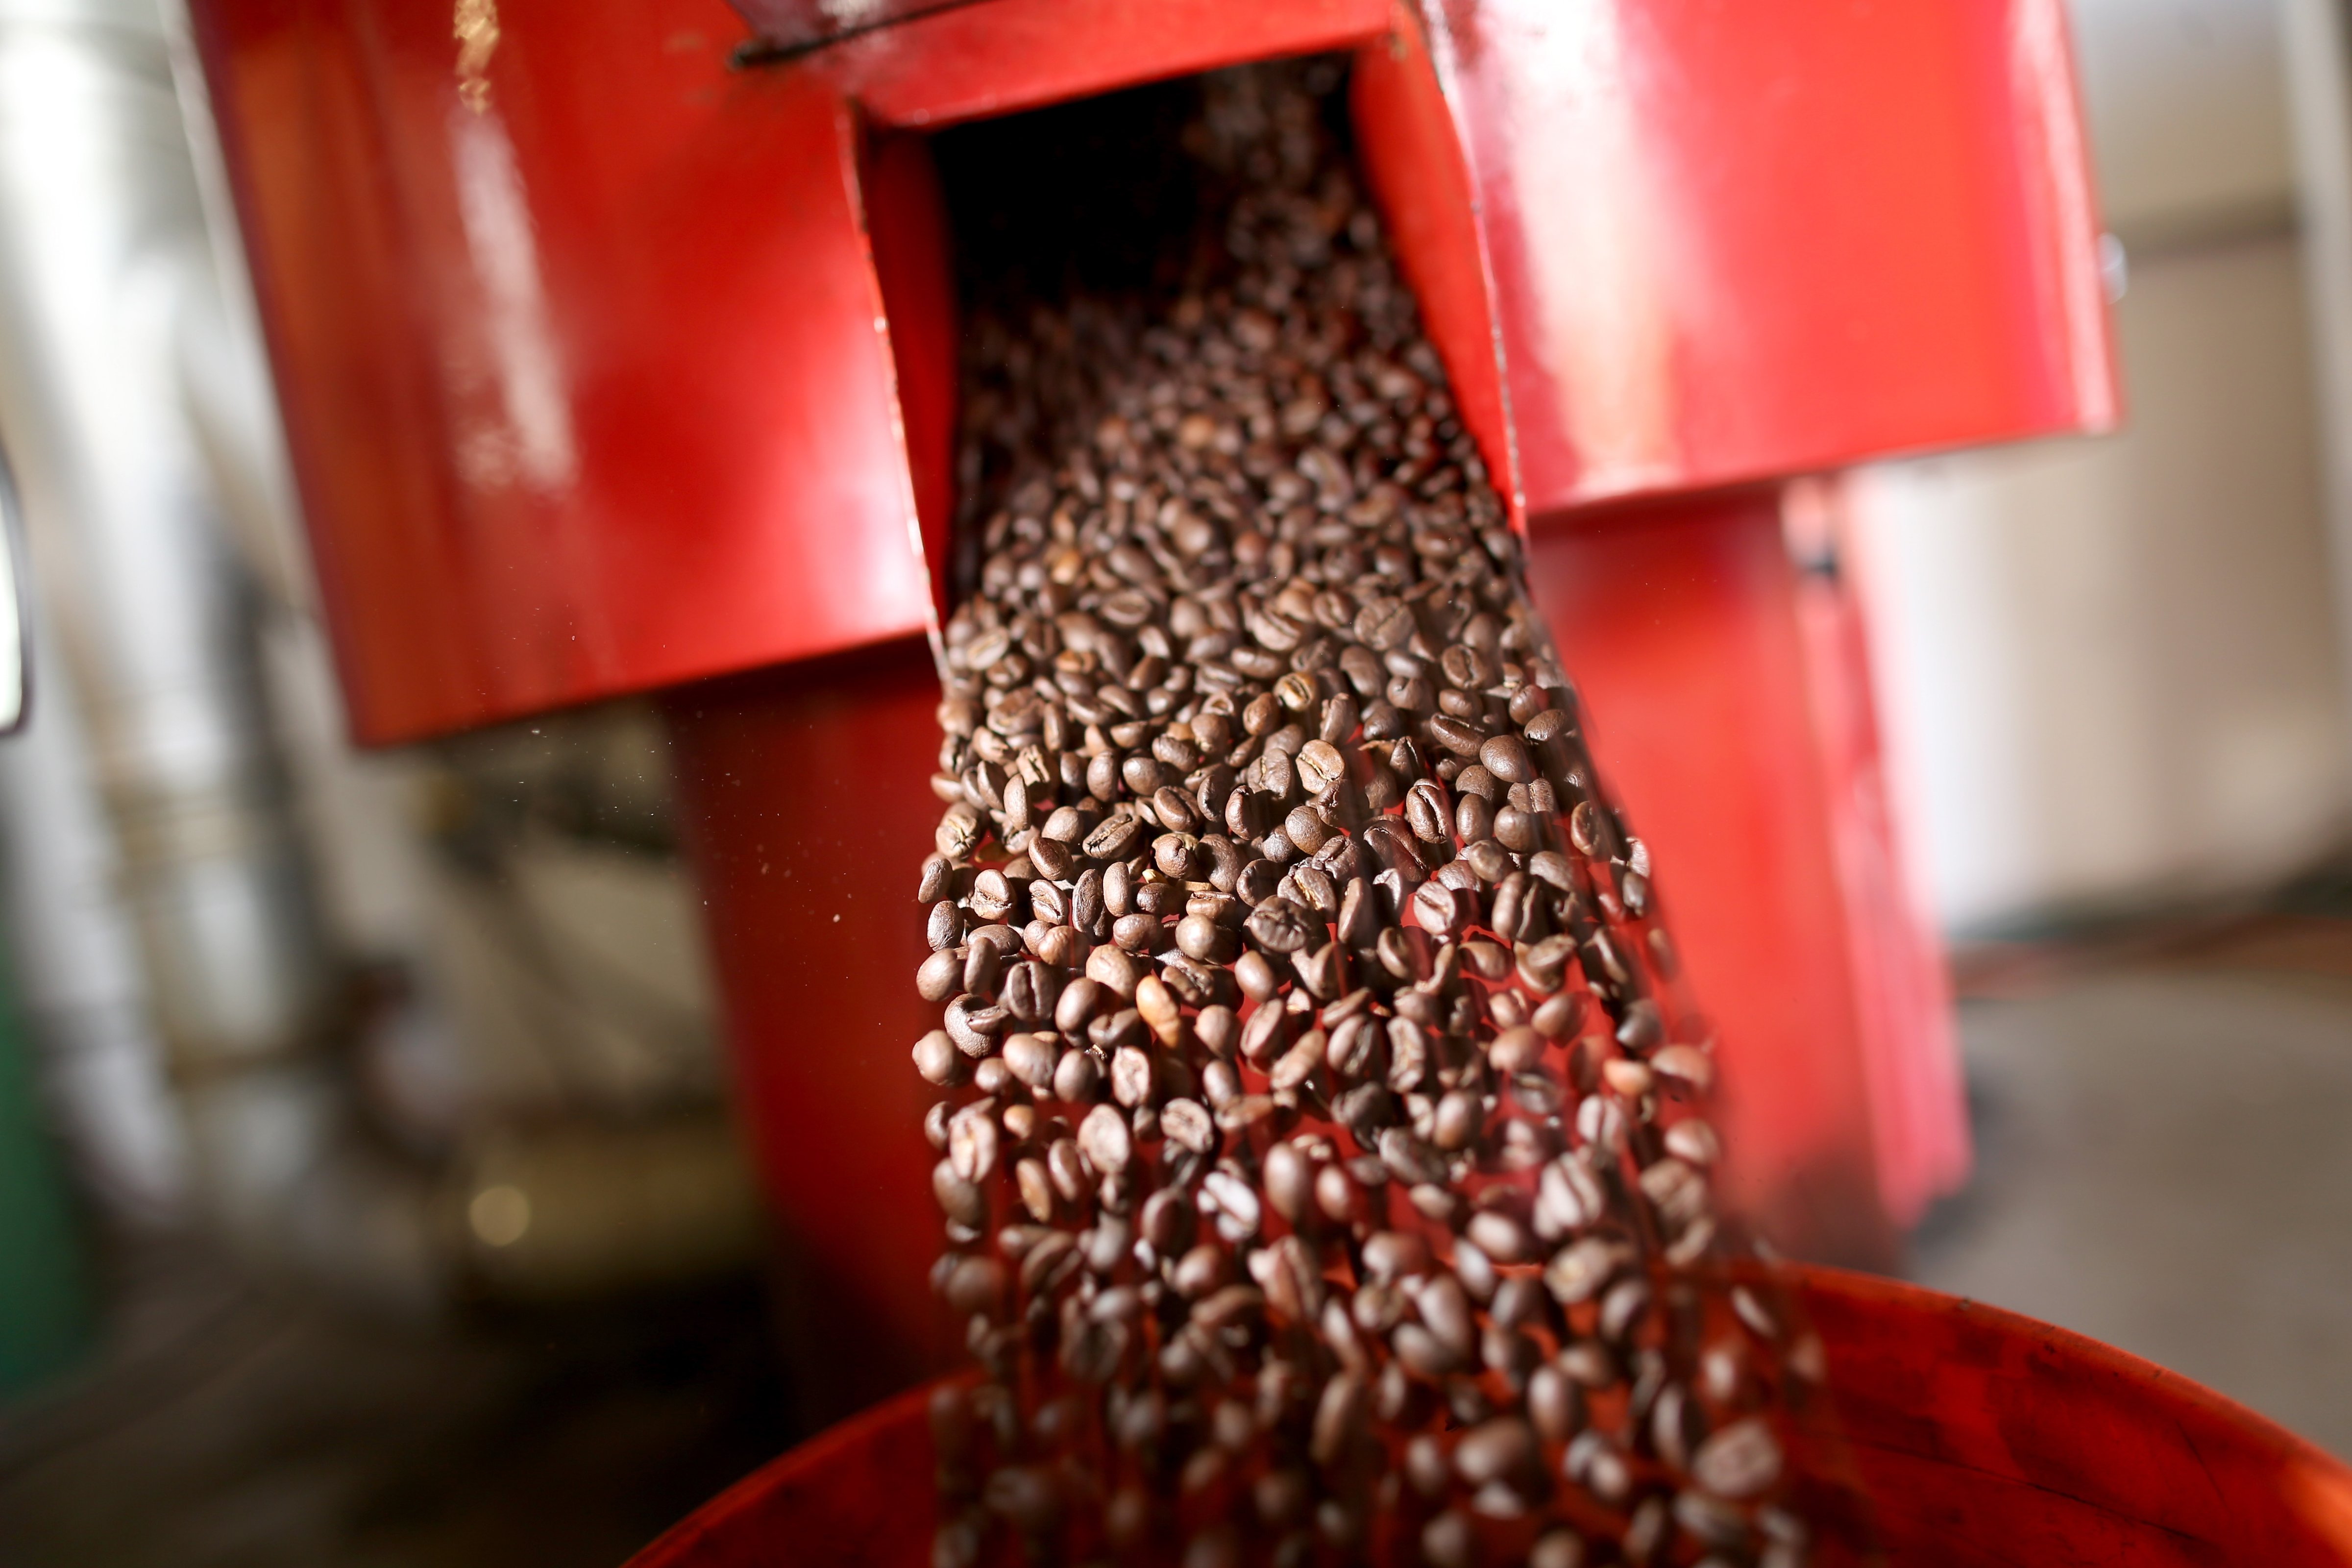 Coffee beans are seen in the roaster during the process of making the Miami Beach blend of coffee at the Kana Coffee Roasters on March 10, 2015 in Margate, Florida. (Joe Raedle—2015 Getty Images)